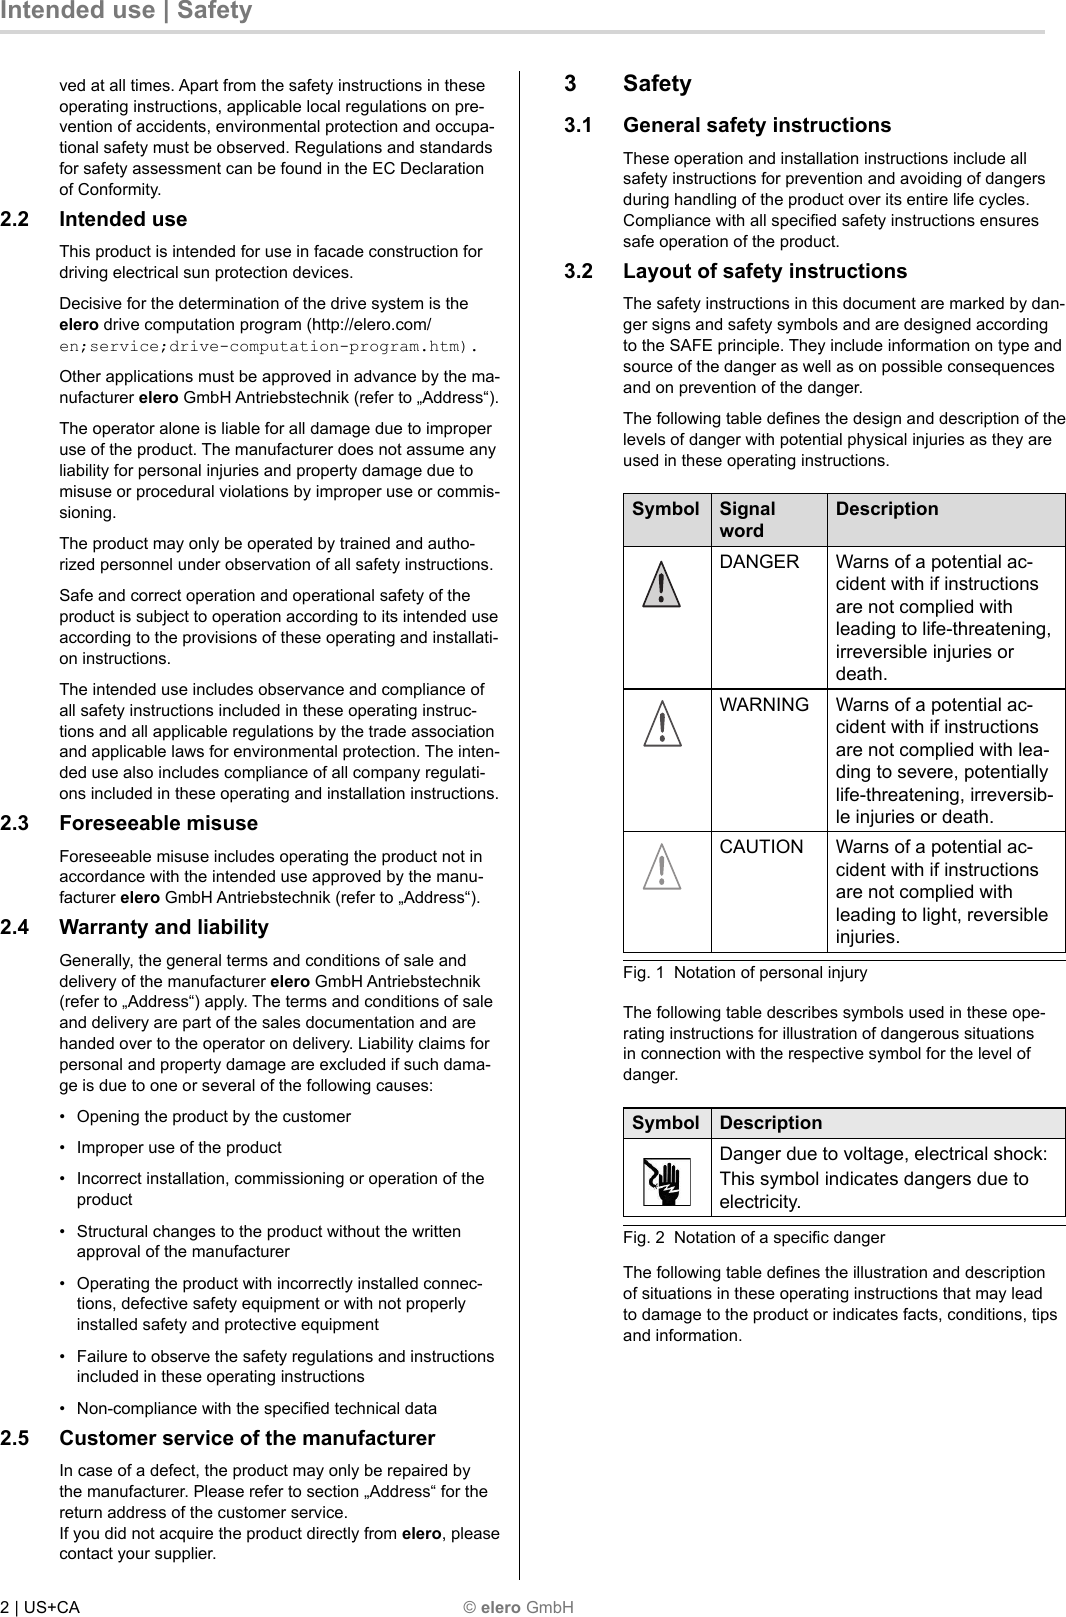 3 Safety 3.1  General safety instructions These operation and installation instructions include all safety instructions for prevention and avoiding of dangers during handling of the product over its entire life cycles. Compliance with all speciﬁ ed safety instructions ensures safe operation of the product. 3.2  Layout of safety instructions The safety instructions in this document are marked by dan-ger signs and safety symbols and are designed according to the SAFE principle. They include information on type and source of the danger as well as on possible consequences and on prevention of the danger. The following table deﬁ nes the design and description of the levels of danger with potential physical injuries as they are used in these operating instructions. Symbol Signal wordDescriptionDANGER Warns of a potential ac-cident with if instructions are not complied with leading to life-threatening, irreversible injuries or death.WARNING Warns of a potential ac-cident with if instructions are not complied with lea-ding to severe, potentially life-threatening, irreversib-le injuries or death.CAUTION Warns of a potential ac-cident with if instructions are not complied with leading to light, reversible injuries.Fig. 1  Notation of personal injury The following table describes symbols used in these ope-rating instructions for illustration of dangerous situations in connection with the respective symbol for the level of danger. Symbol DescriptionDanger due to voltage, electrical shock:This symbol indicates dangers due to electricity.Fig. 2  Notation of a speciﬁ c danger The following table deﬁ nes the illustration and description of situations in these operating instructions that may lead to damage to the product or indicates facts, conditions, tips and information. 2 | US+CA   © elero GmbH Intended use | Safety ved at all times. Apart from the safety instructions in these operating instructions, applicable local regulations on pre-vention of accidents, environmental protection and occupa-tional safety must be observed. Regulations and standards for safety assessment can be found in the EC Declaration of Conformity. 2.2 Intended use This product is intended for use in facade construction for driving electrical sun protection devices. Decisive for the determination of the drive system is the elero drive computation program (http://elero.com/en;service;drive-computation-program.htm). Other applications must be approved in advance by the ma-nufacturer elero GmbH Antriebstechnik (refer to „Address“). The operator alone is liable for all damage due to improper use of the product. The manufacturer does not assume any liability for personal injuries and property damage due to misuse or procedural violations by improper use or commis-sioning. The product may only be operated by trained and autho-rized personnel under observation of all safety instructions. Safe and correct operation and operational safety of the product is subject to operation according to its intended use according to the provisions of these operating and installati-on instructions. The intended use includes observance and compliance of all safety instructions included in these operating instruc-tions and all applicable regulations by the trade association and applicable laws for environmental protection. The inten-ded use also includes compliance of all company regulati-ons included in these operating and installation instructions. 2.3 Foreseeable misuse Foreseeable misuse includes operating the product not in accordance with the intended use approved by the manu-facturer elero GmbH Antriebstechnik (refer to „Address“). 2.4  Warranty and liability Generally, the general terms and conditions of sale and delivery of the manufacturer elero GmbH Antriebstechnik (refer to „Address“) apply. The terms and conditions of sale and delivery are part of the sales documentation and are handed over to the operator on delivery. Liability claims for personal and property damage are excluded if such dama-ge is due to one or several of the following causes: •  Opening the product by the customer •  Improper use of the product •  Incorrect installation, commissioning or operation of the product •  Structural changes to the product without the written approval of the manufacturer •  Operating the product with incorrectly installed connec-tions, defective safety equipment or with not properly installed safety and protective equipment •  Failure to observe the safety regulations and instructions included in these operating instructions •  Non-compliance with the speciﬁ ed technical data 2.5  Customer service of the manufacturer In case of a defect, the product may only be repaired by the manufacturer. Please refer to section „Address“ for the return address of the customer service. If you did not acquire the product directly from elero, please contact your supplier. 